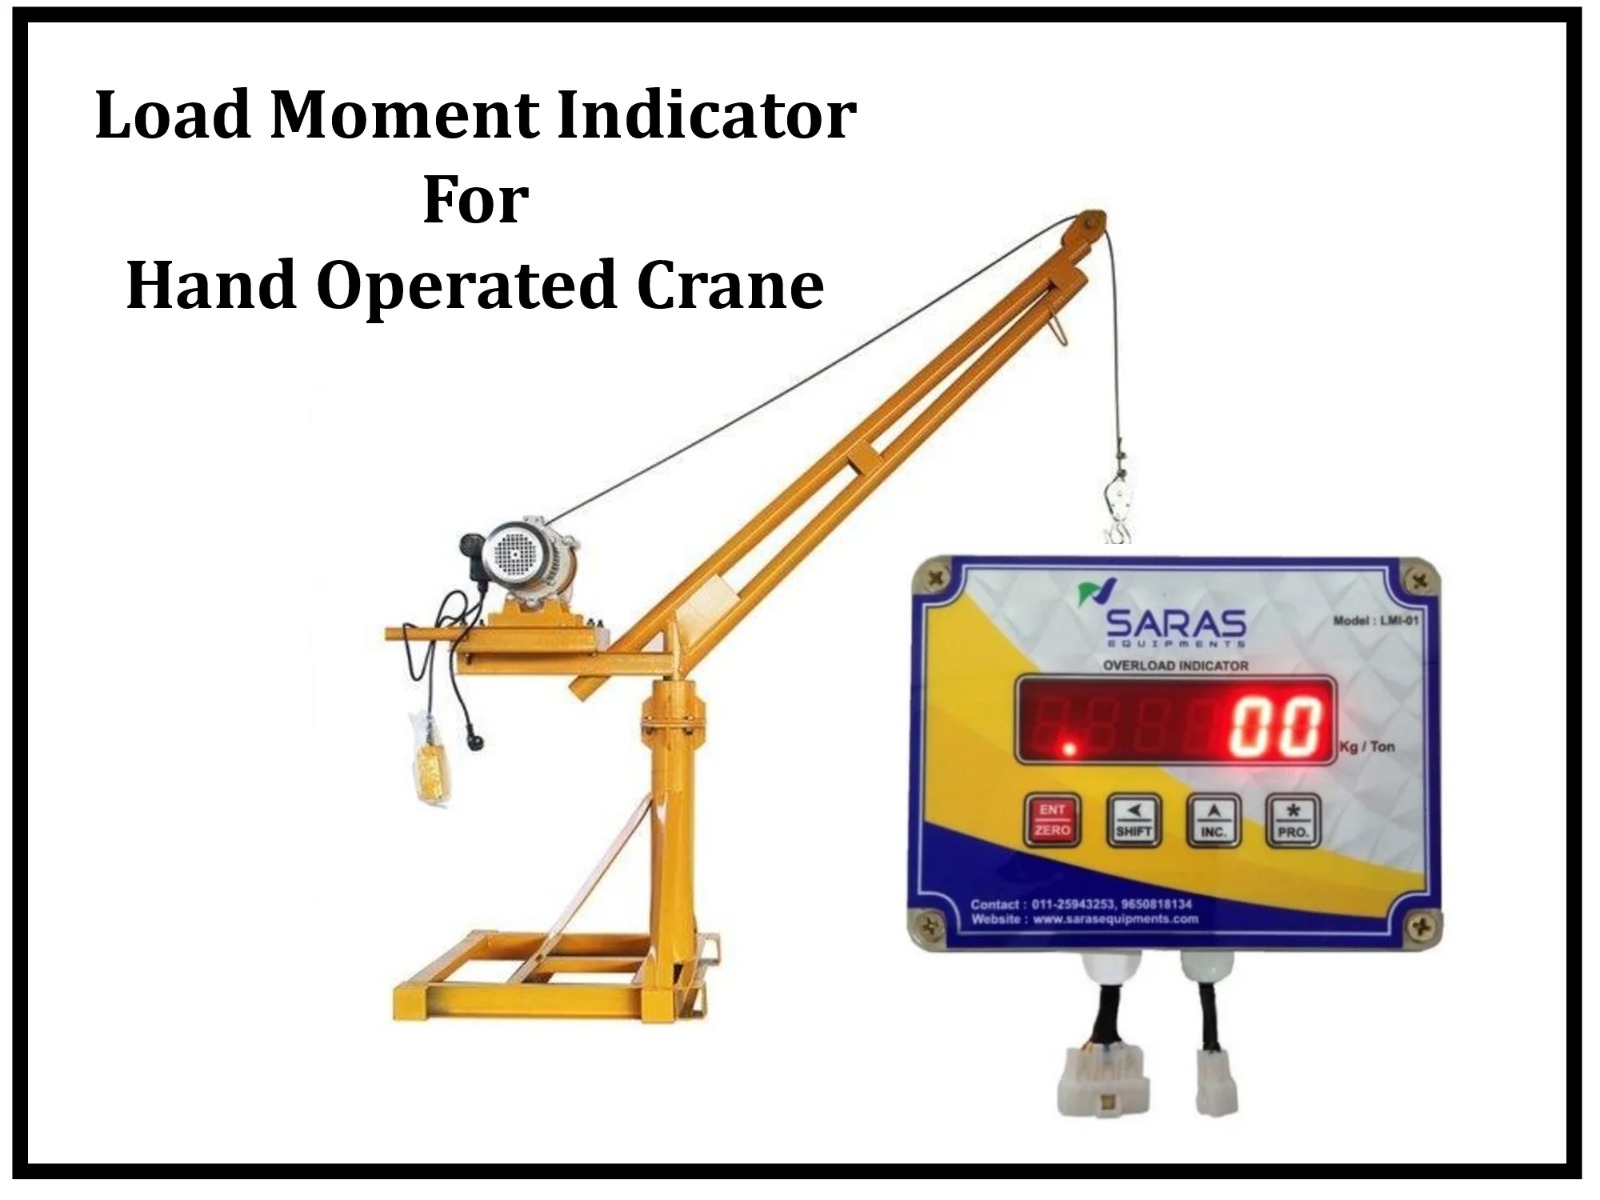 Load Moment Indicator for Hand Operated Crane